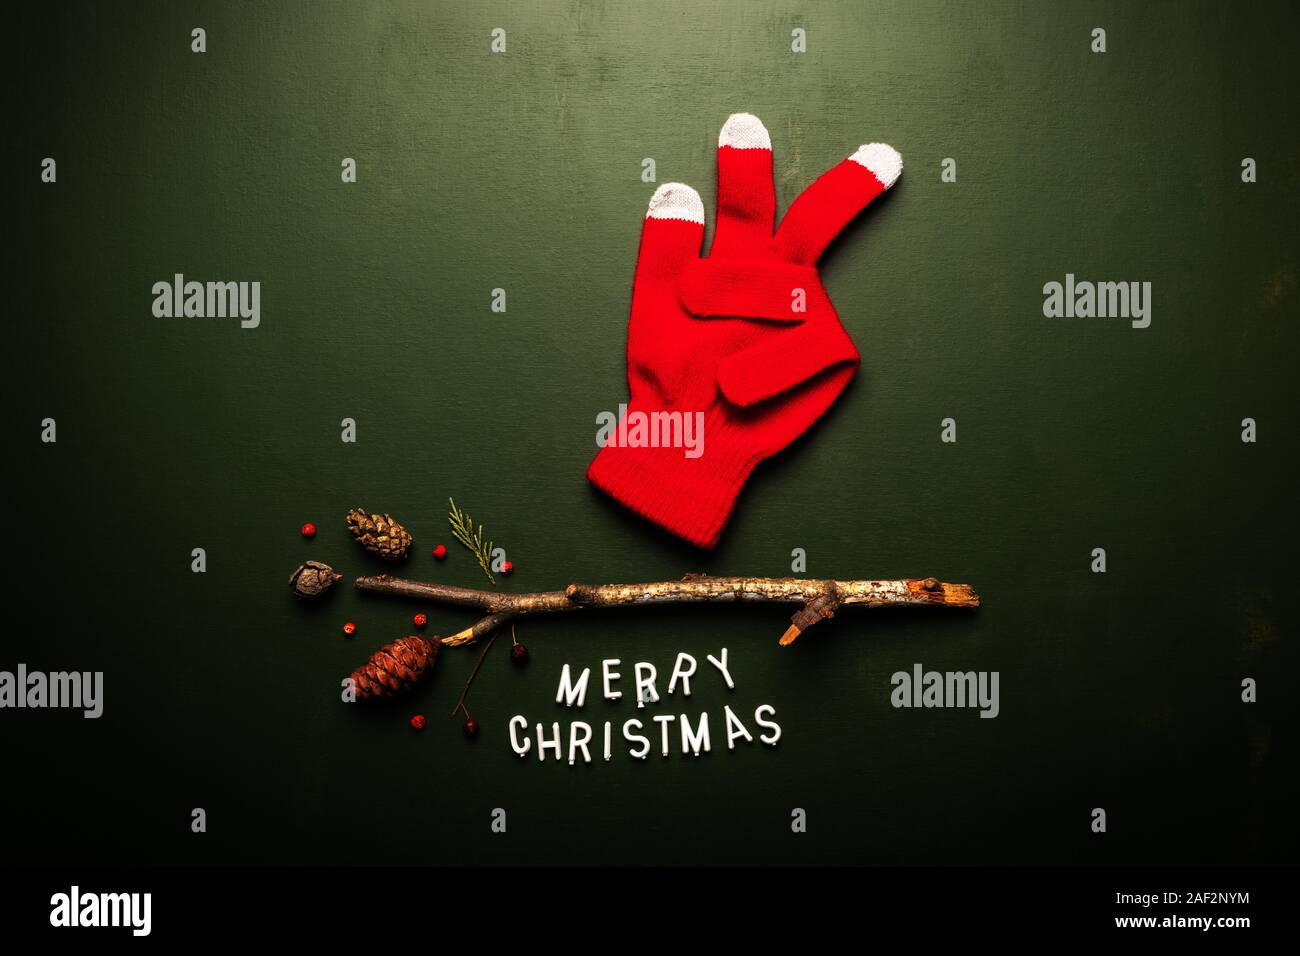 Merry Christmas text flat lay top view with Santa Claus knitted gloves showing three fingers on green background, xmas holiday conceptual image Stock Photo